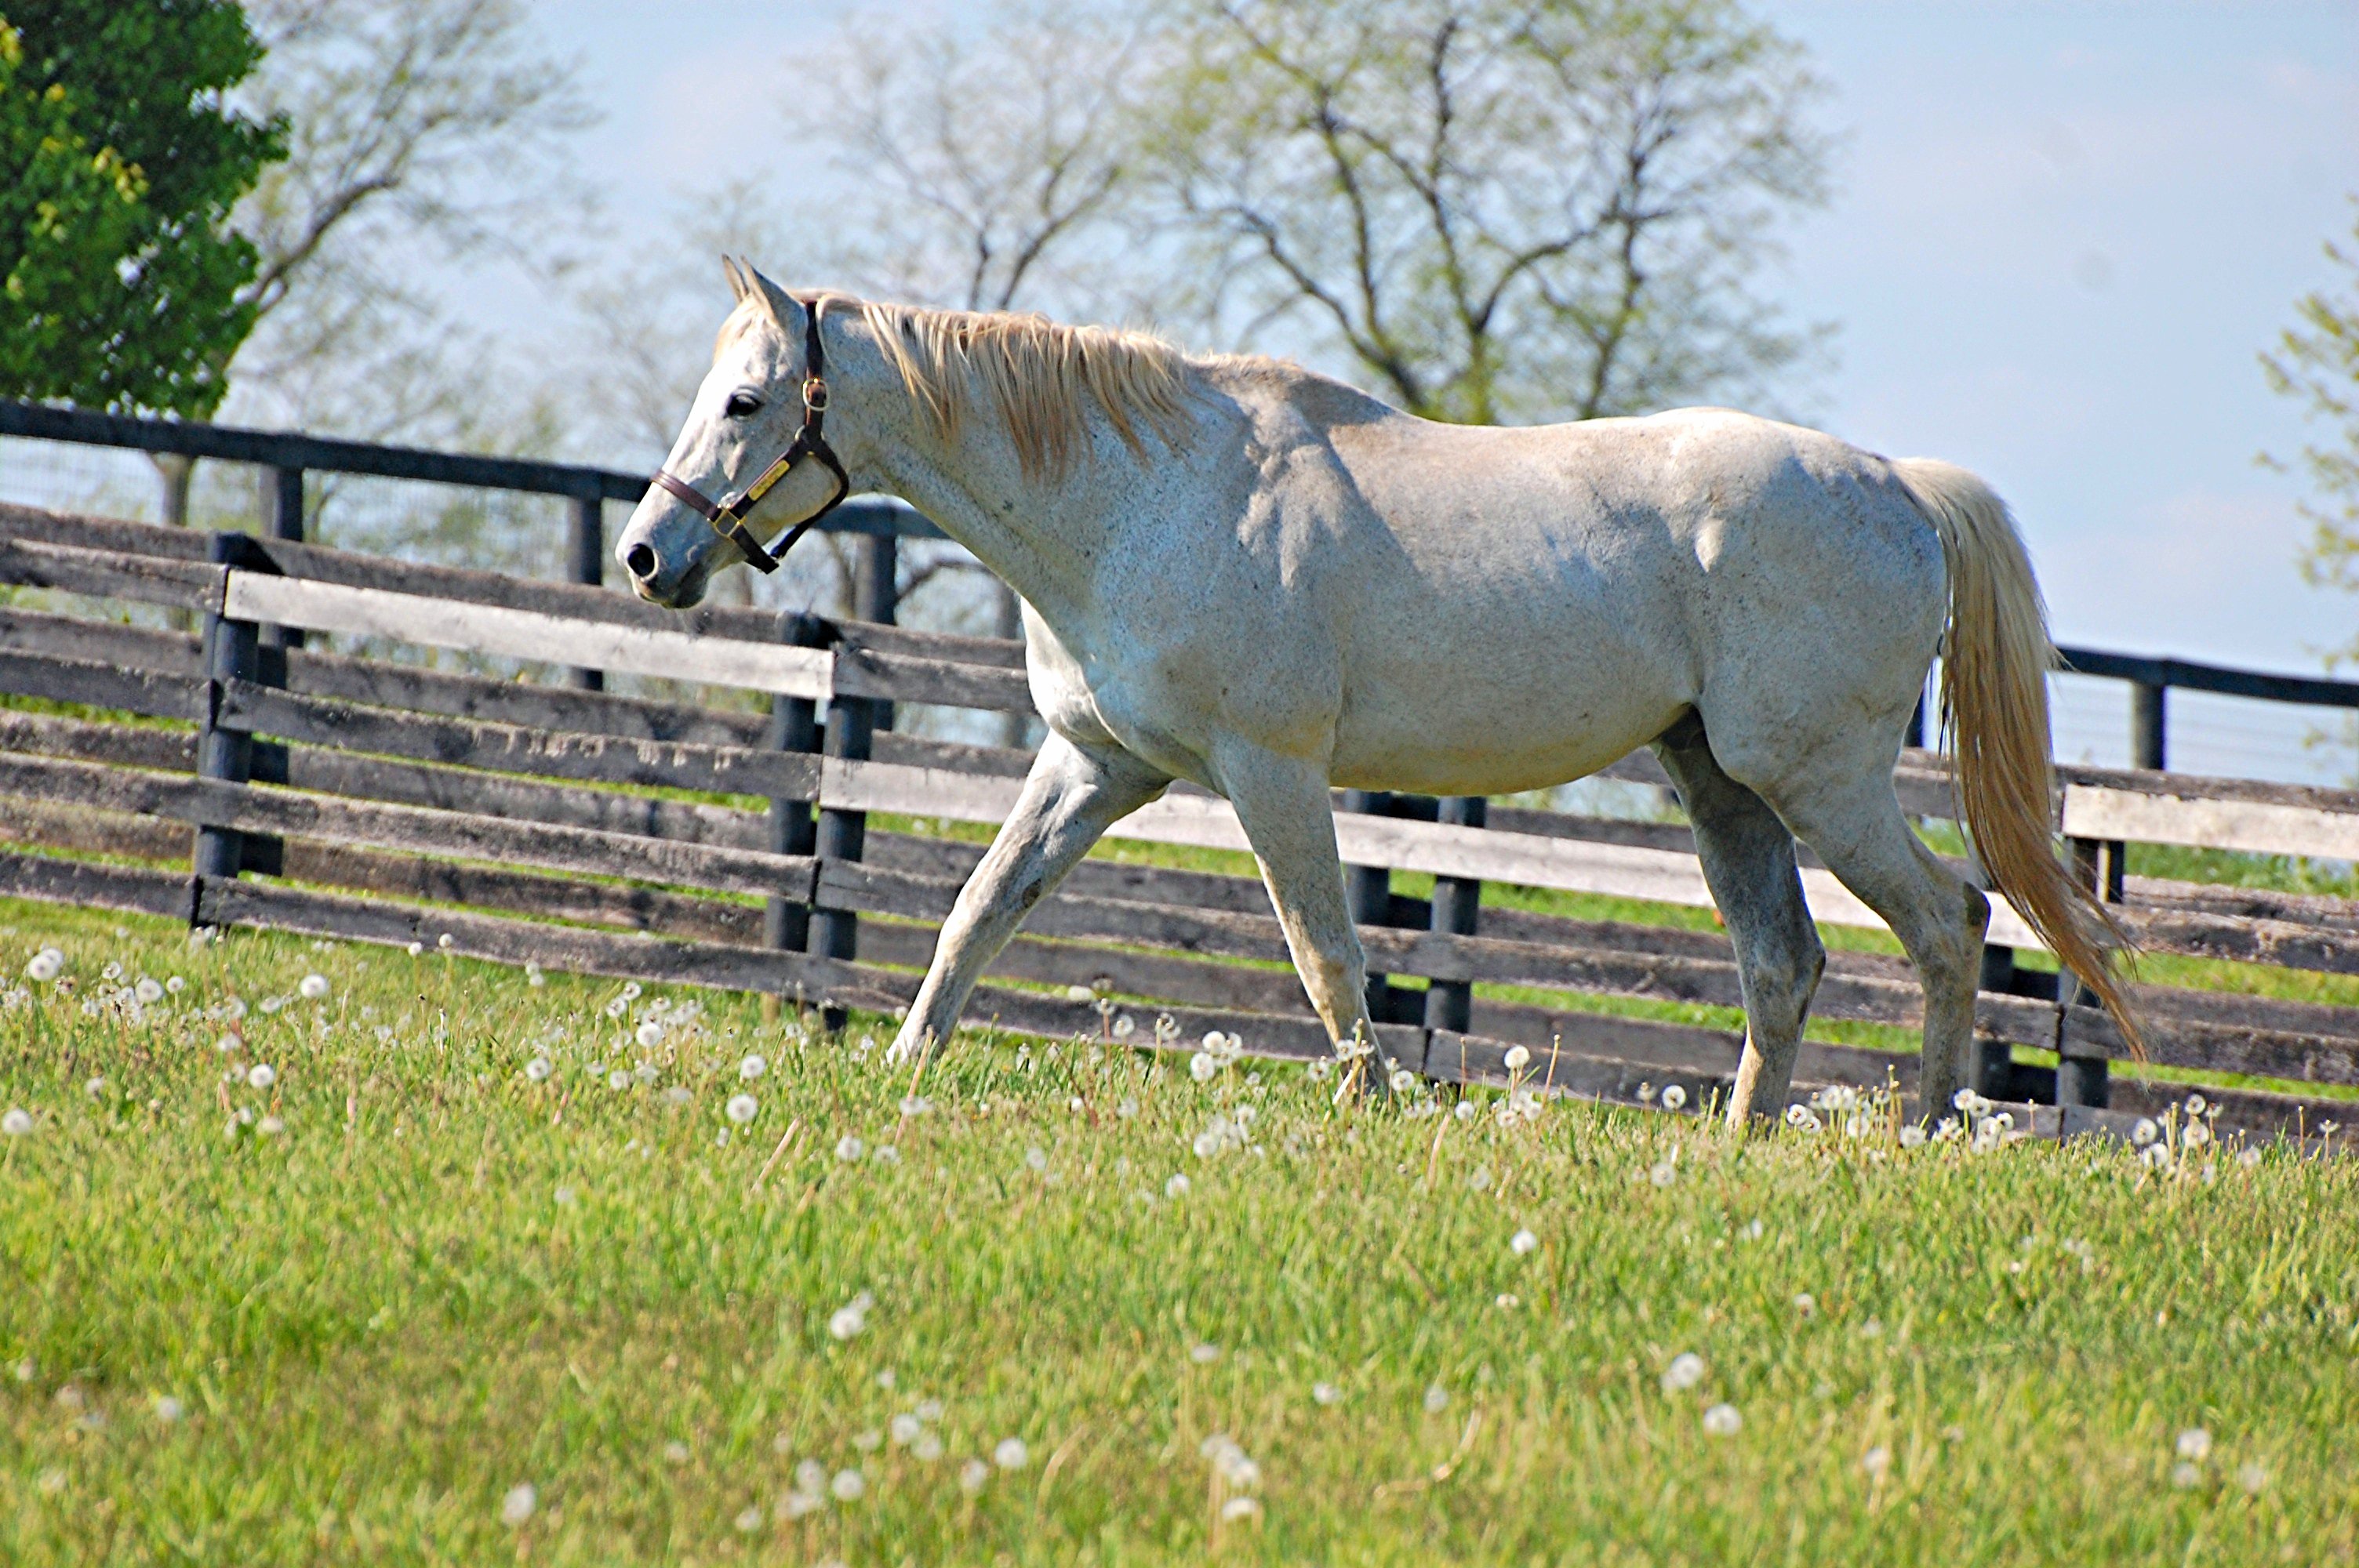 Silver Charm at Old Friends in Georgetown, Kentucky, 2016 (Rick Capone)